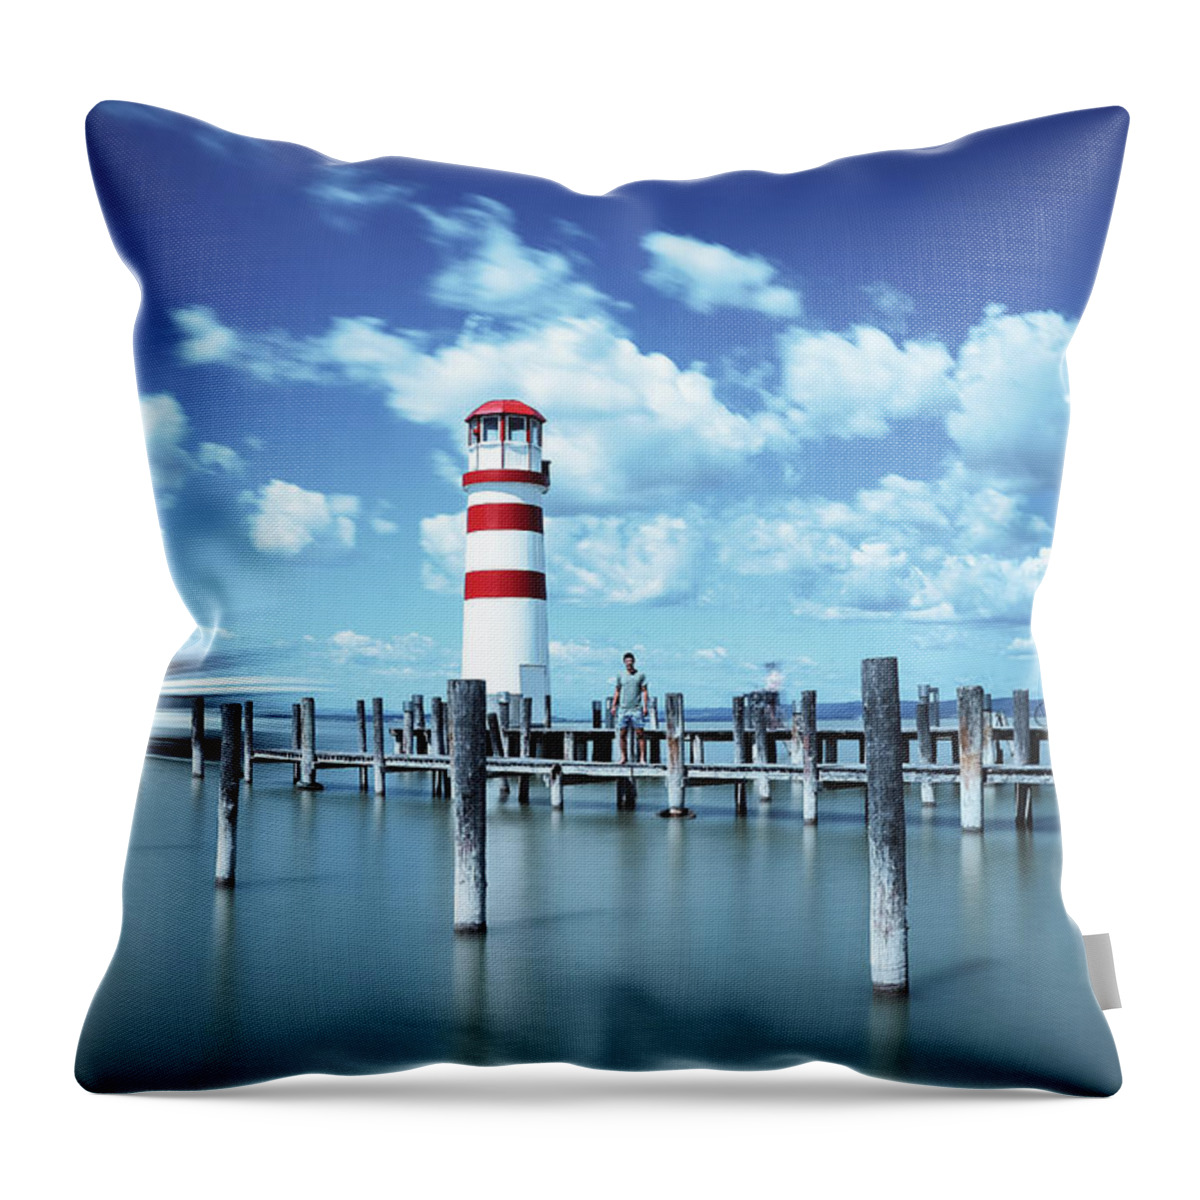 Destinations Throw Pillow featuring the photograph White-red lighthouse in Podersdorf am See by Vaclav Sonnek